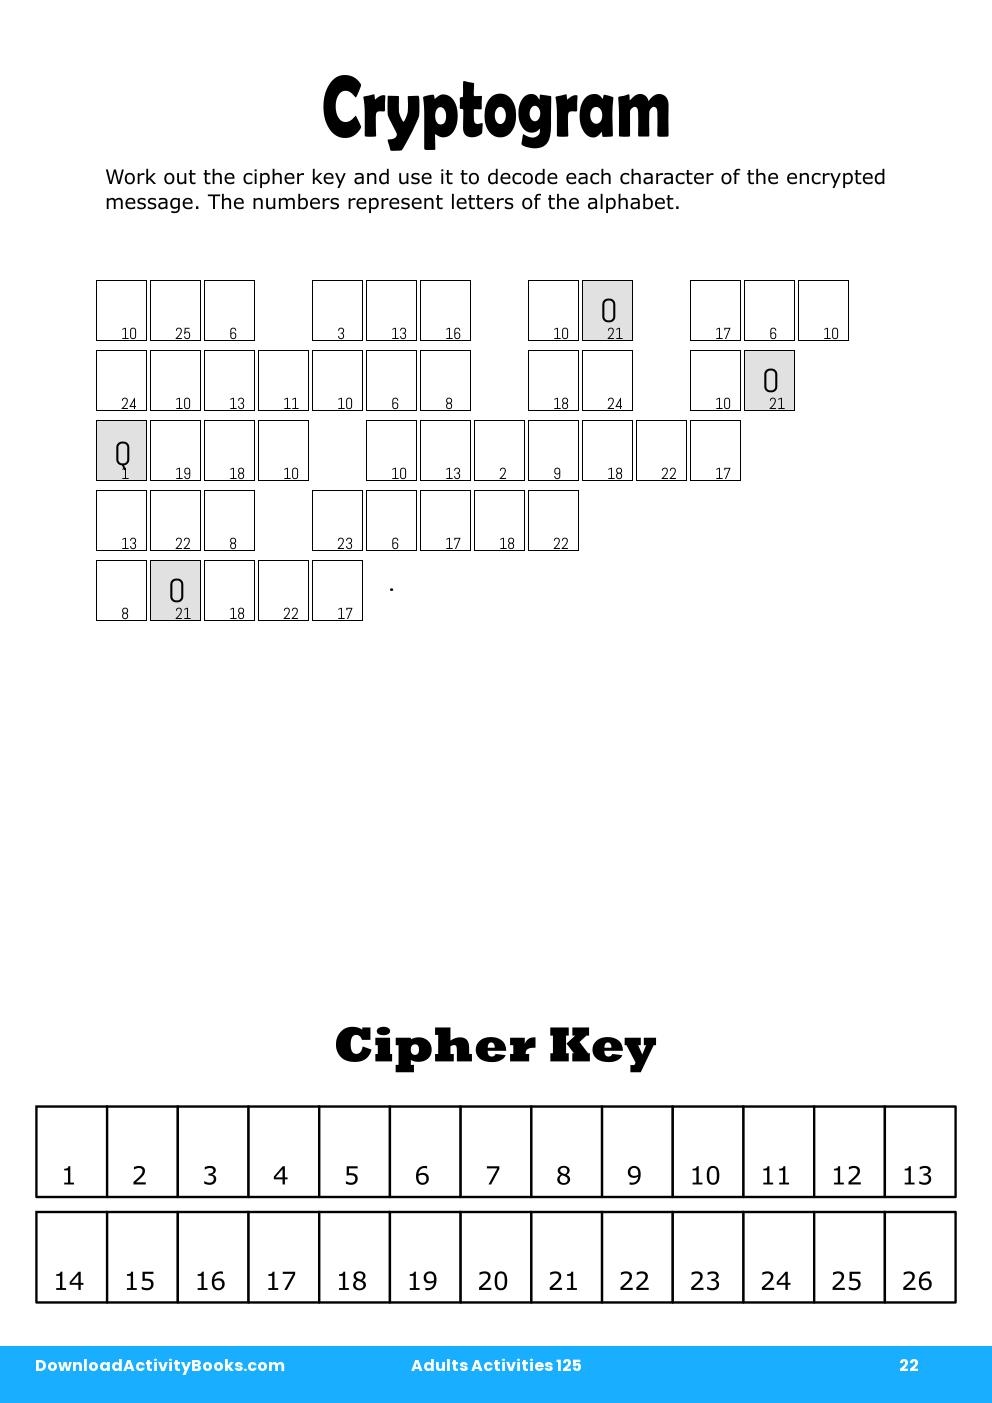 Cryptogram in Adults Activities 125